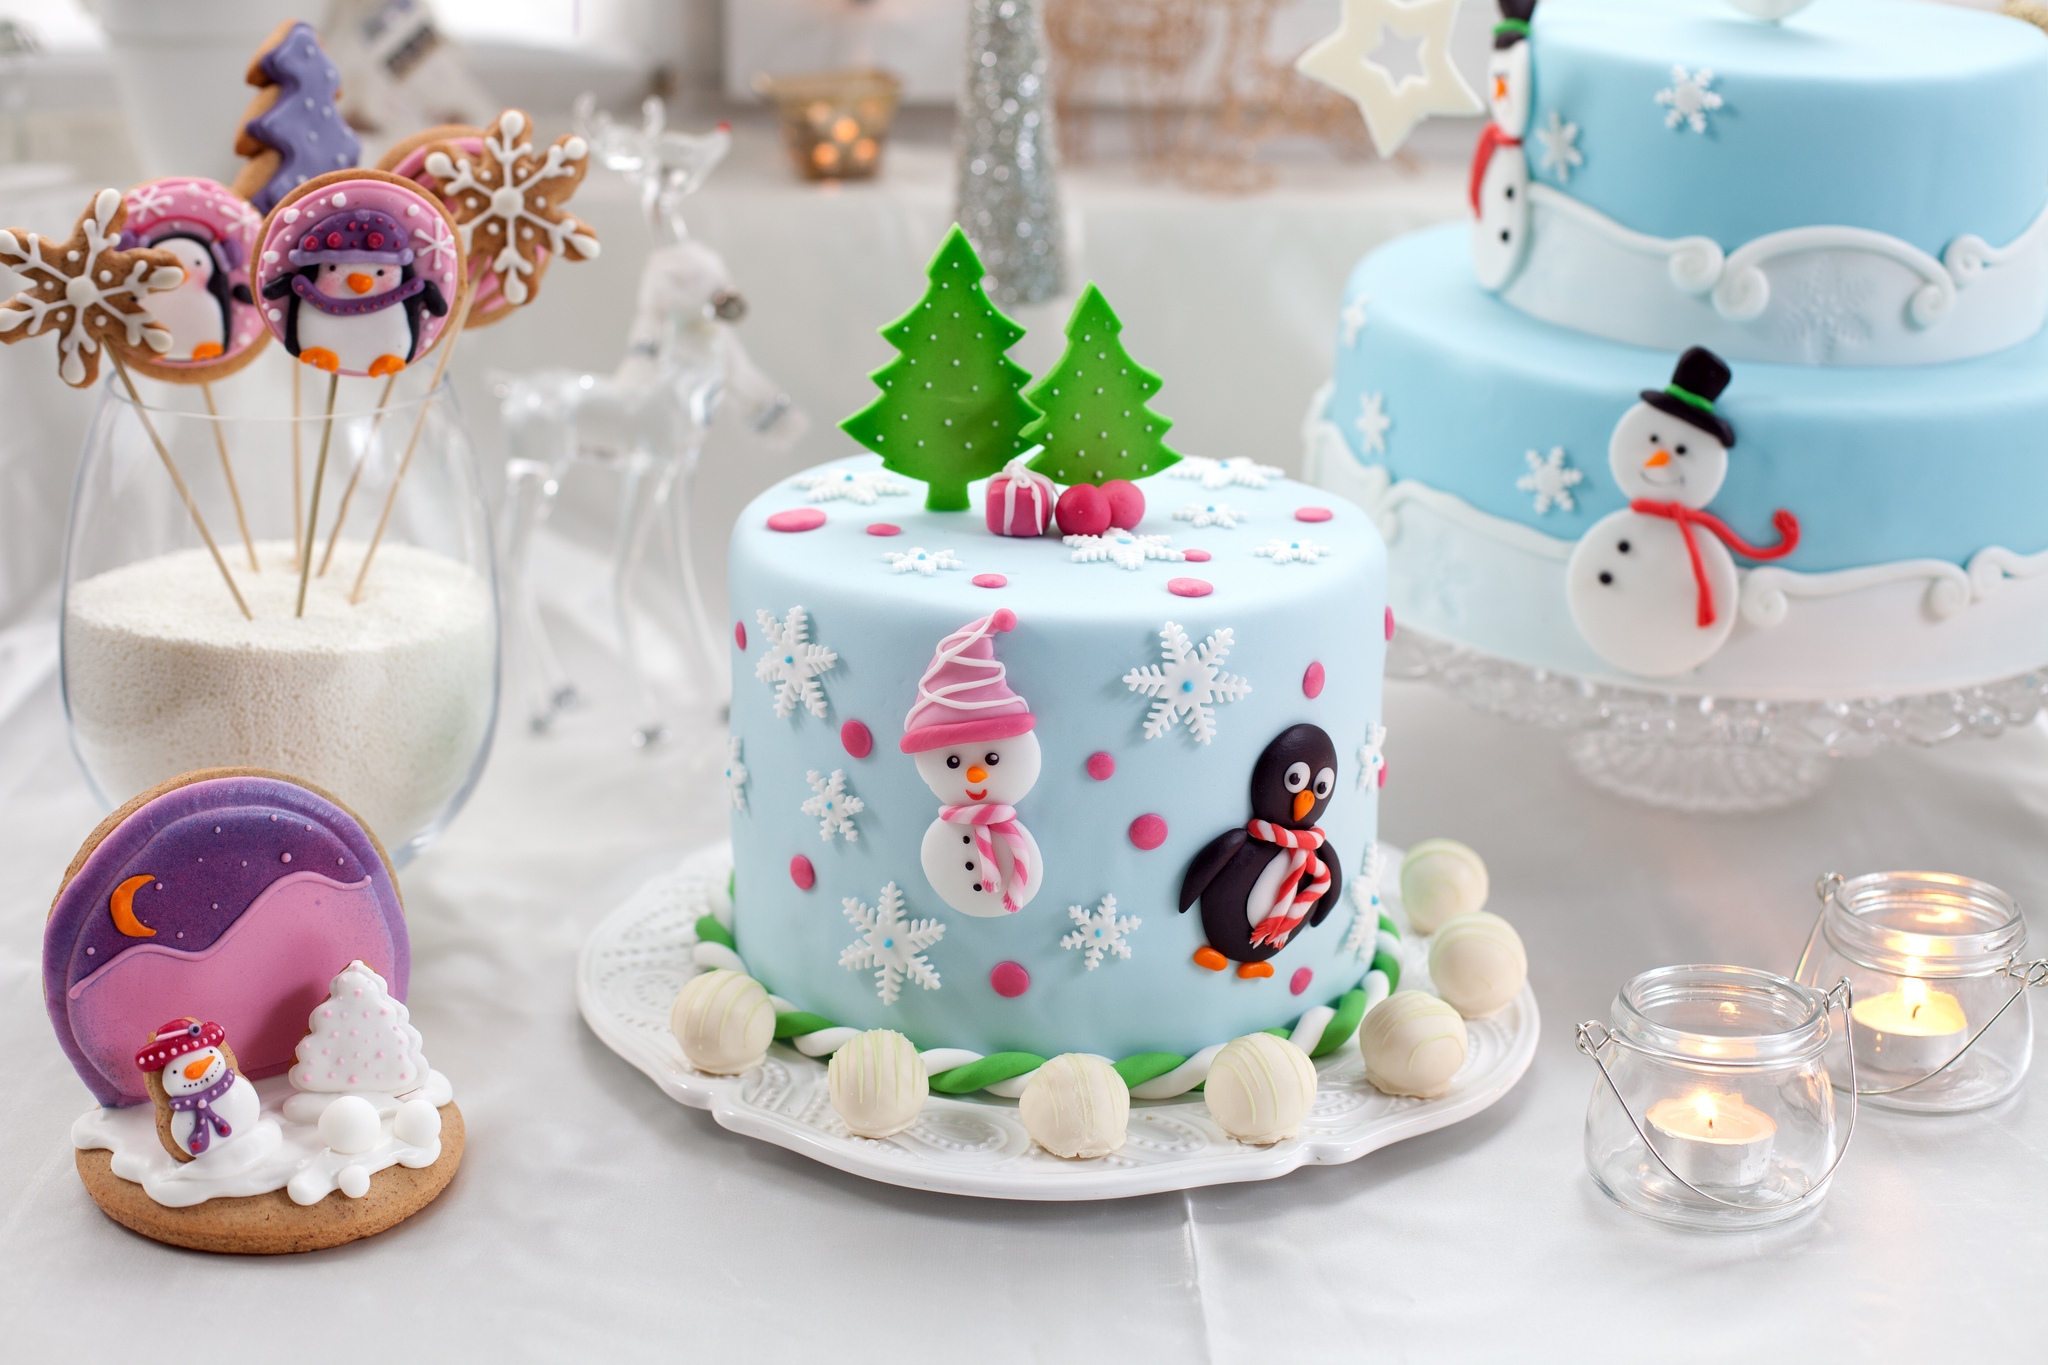 89968 download wallpaper cakes, food, new year, glaze, tasty, delicious, new year’s screensavers and pictures for free